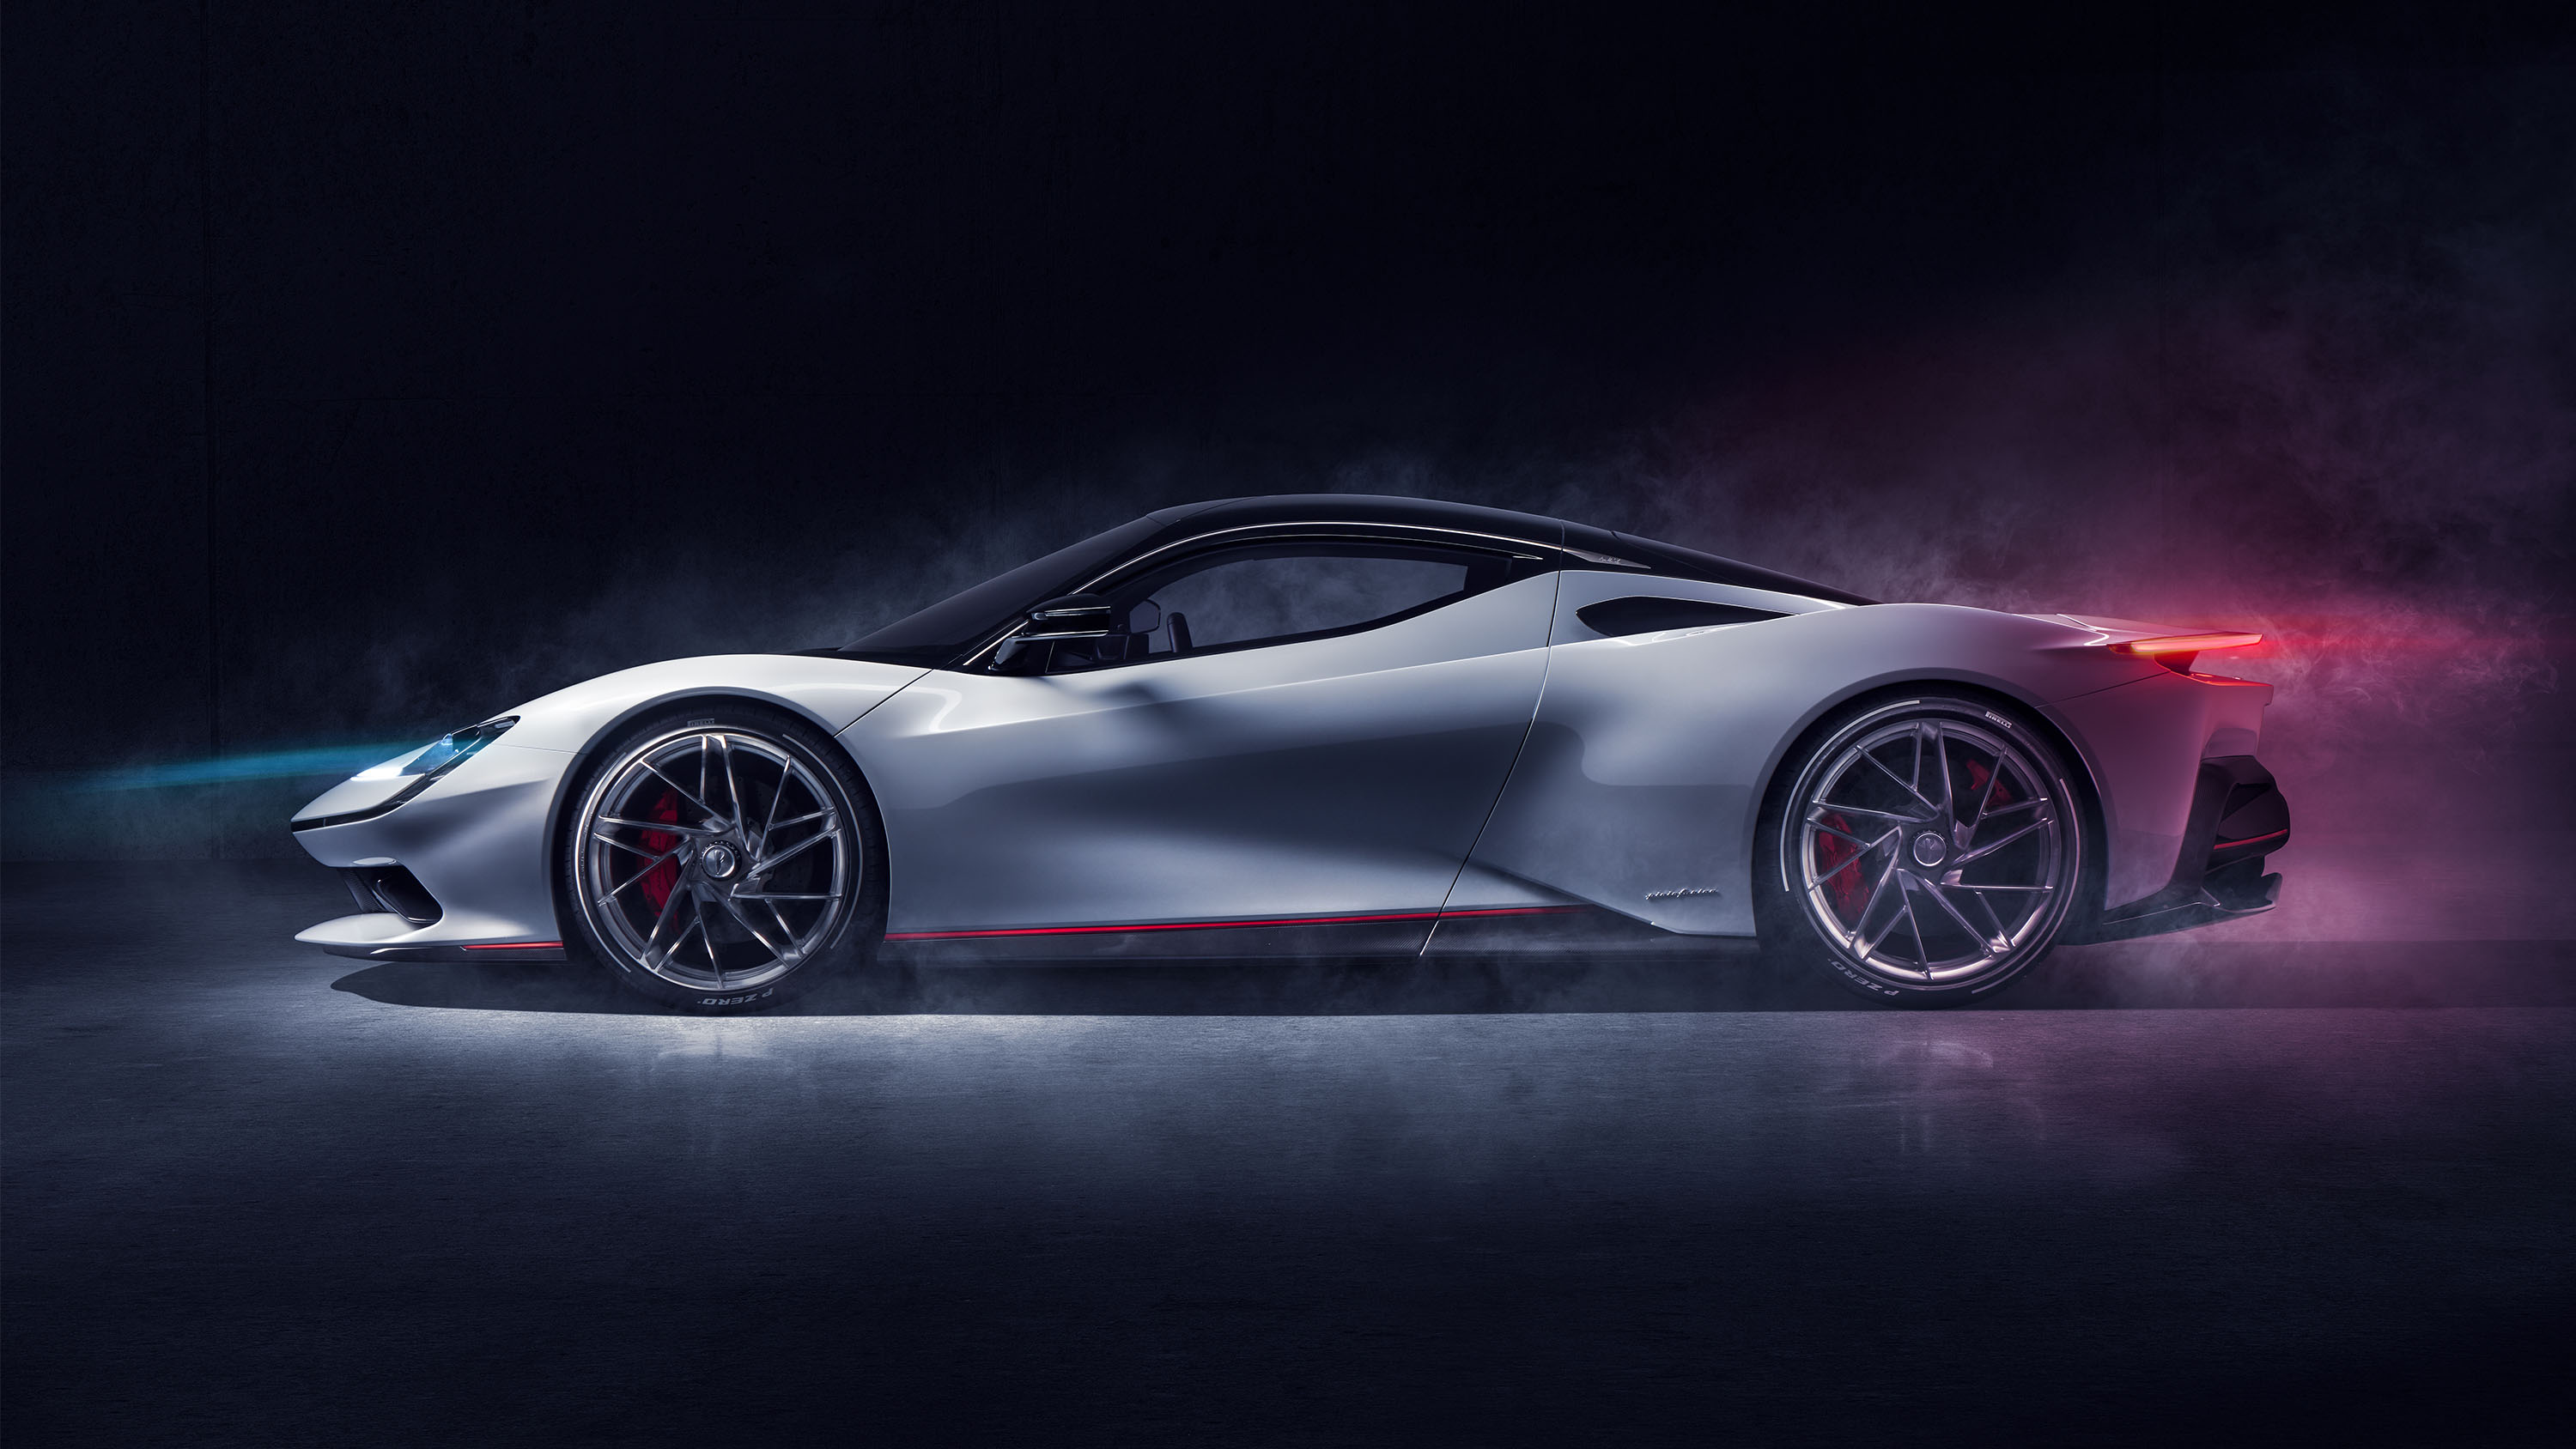 The gorgeous Pininfarina Battista is coming to Goodwood